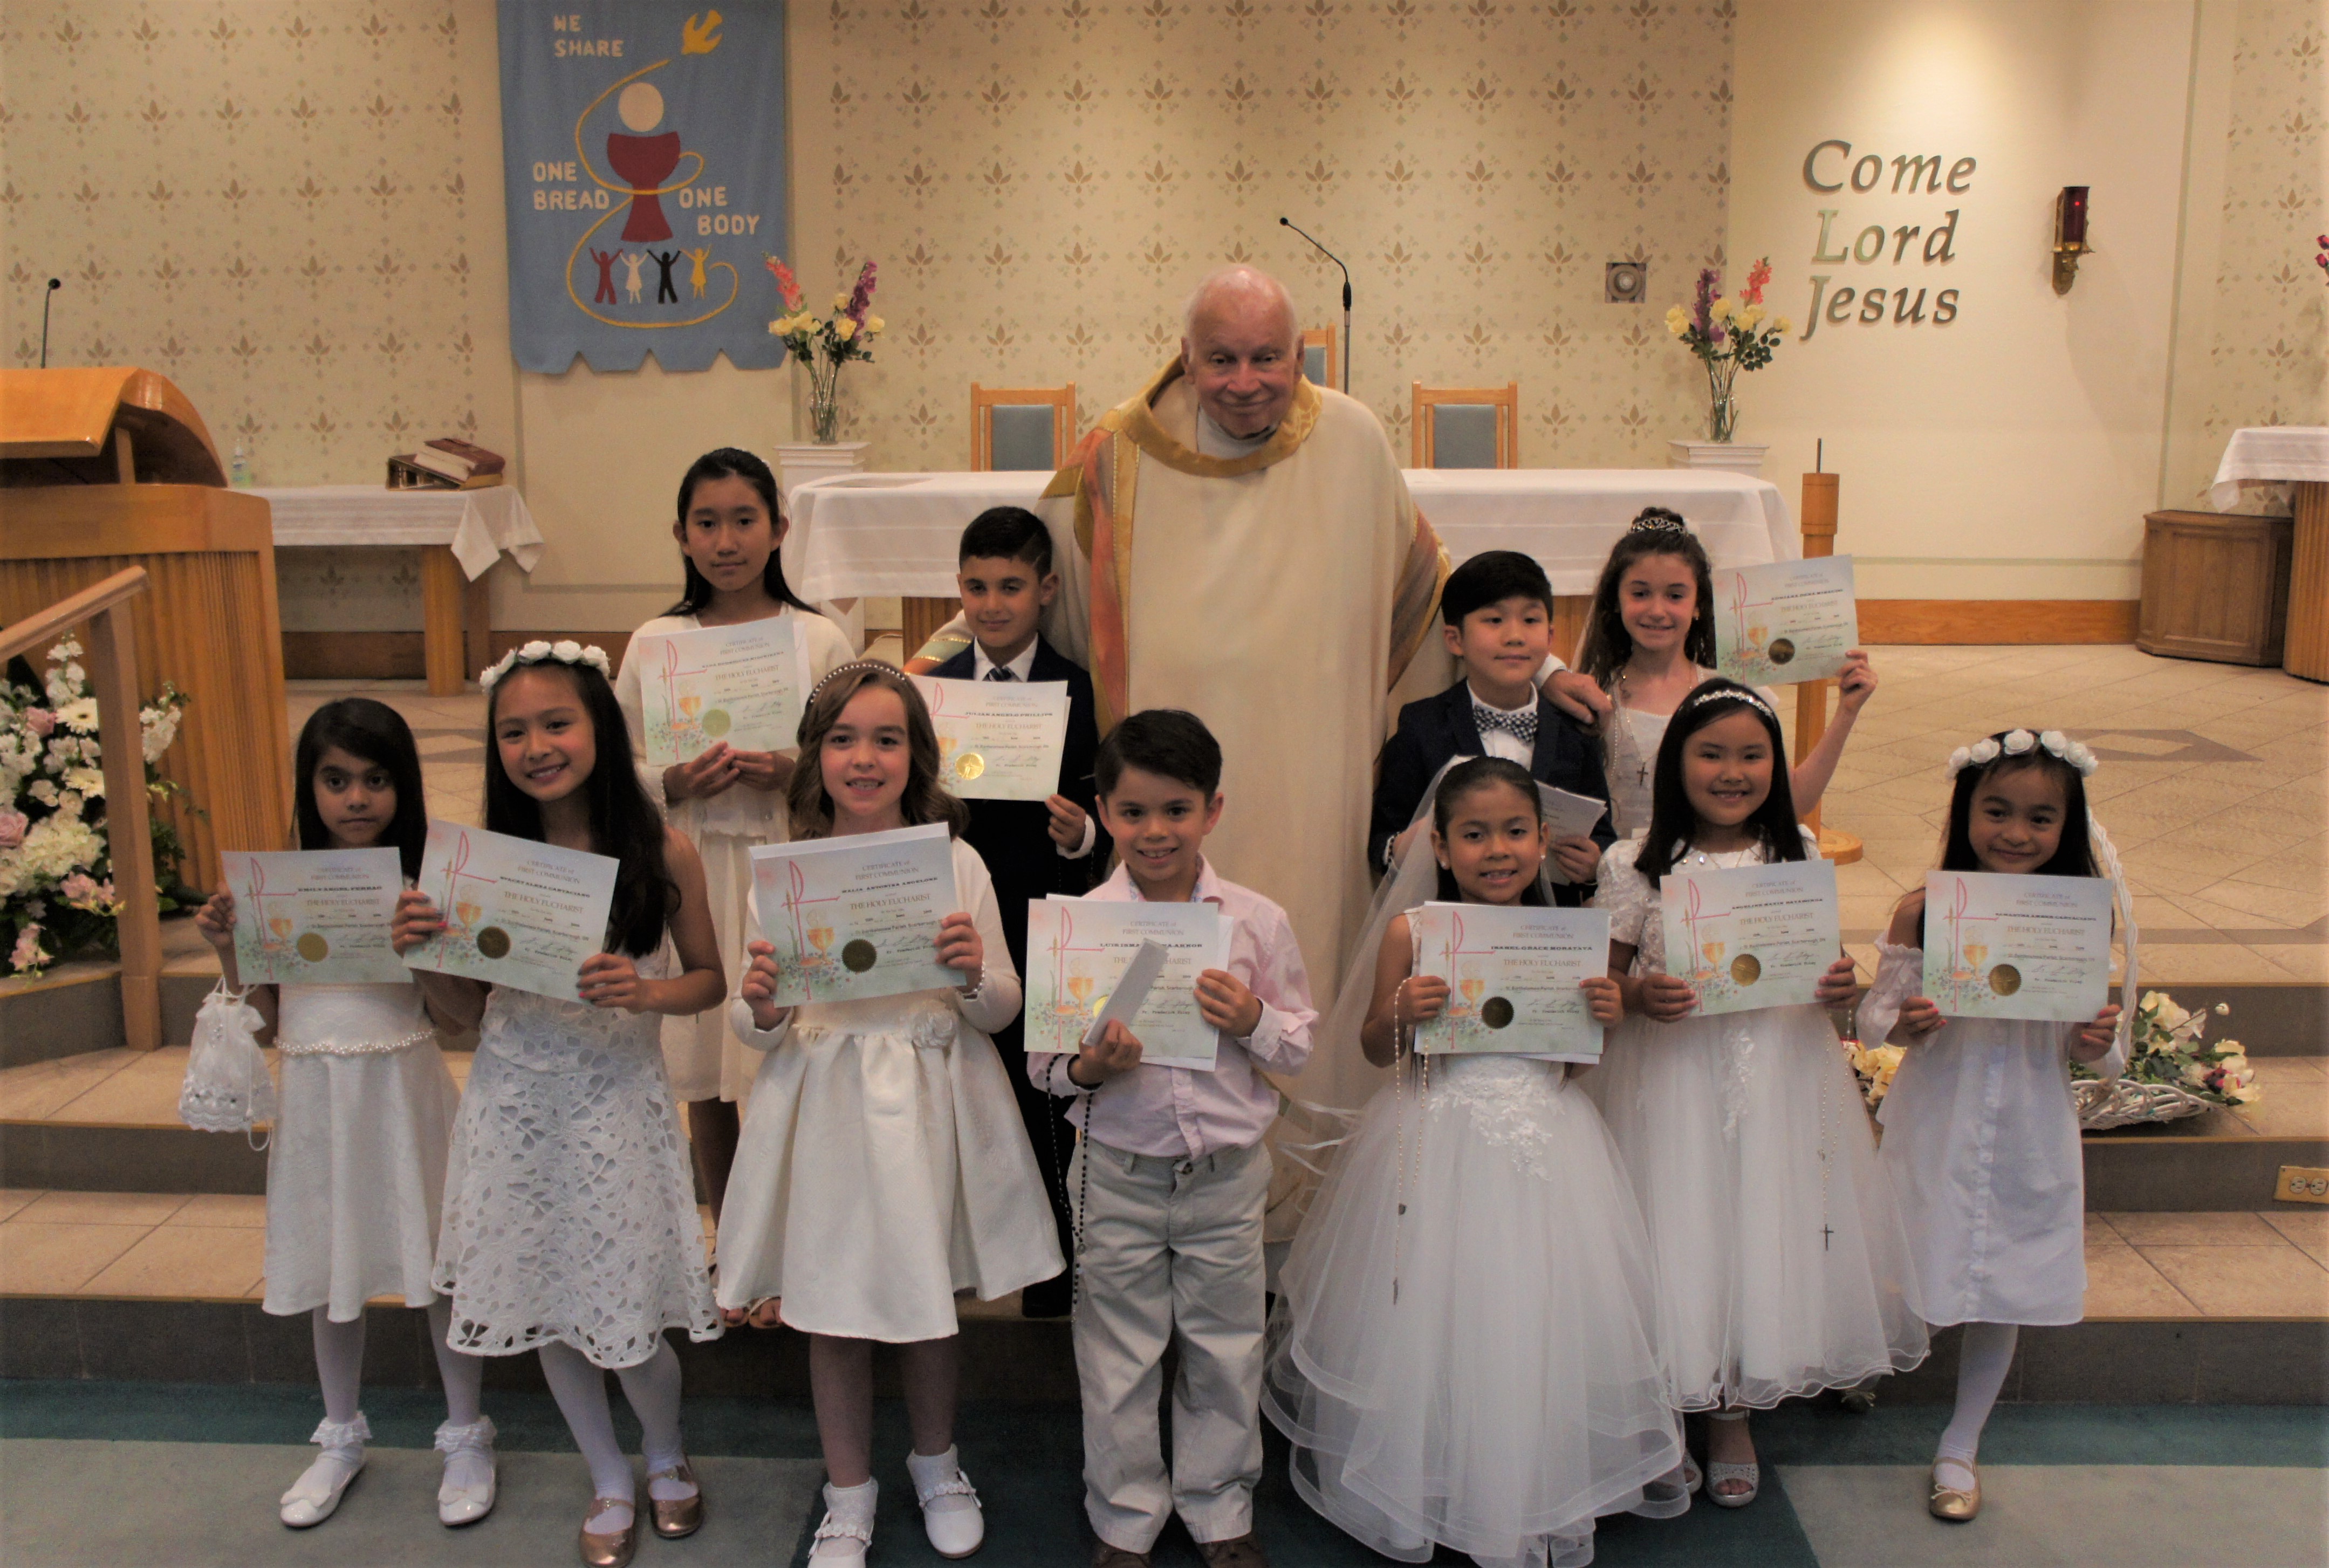 Children making their First Communion with Fr. Foley